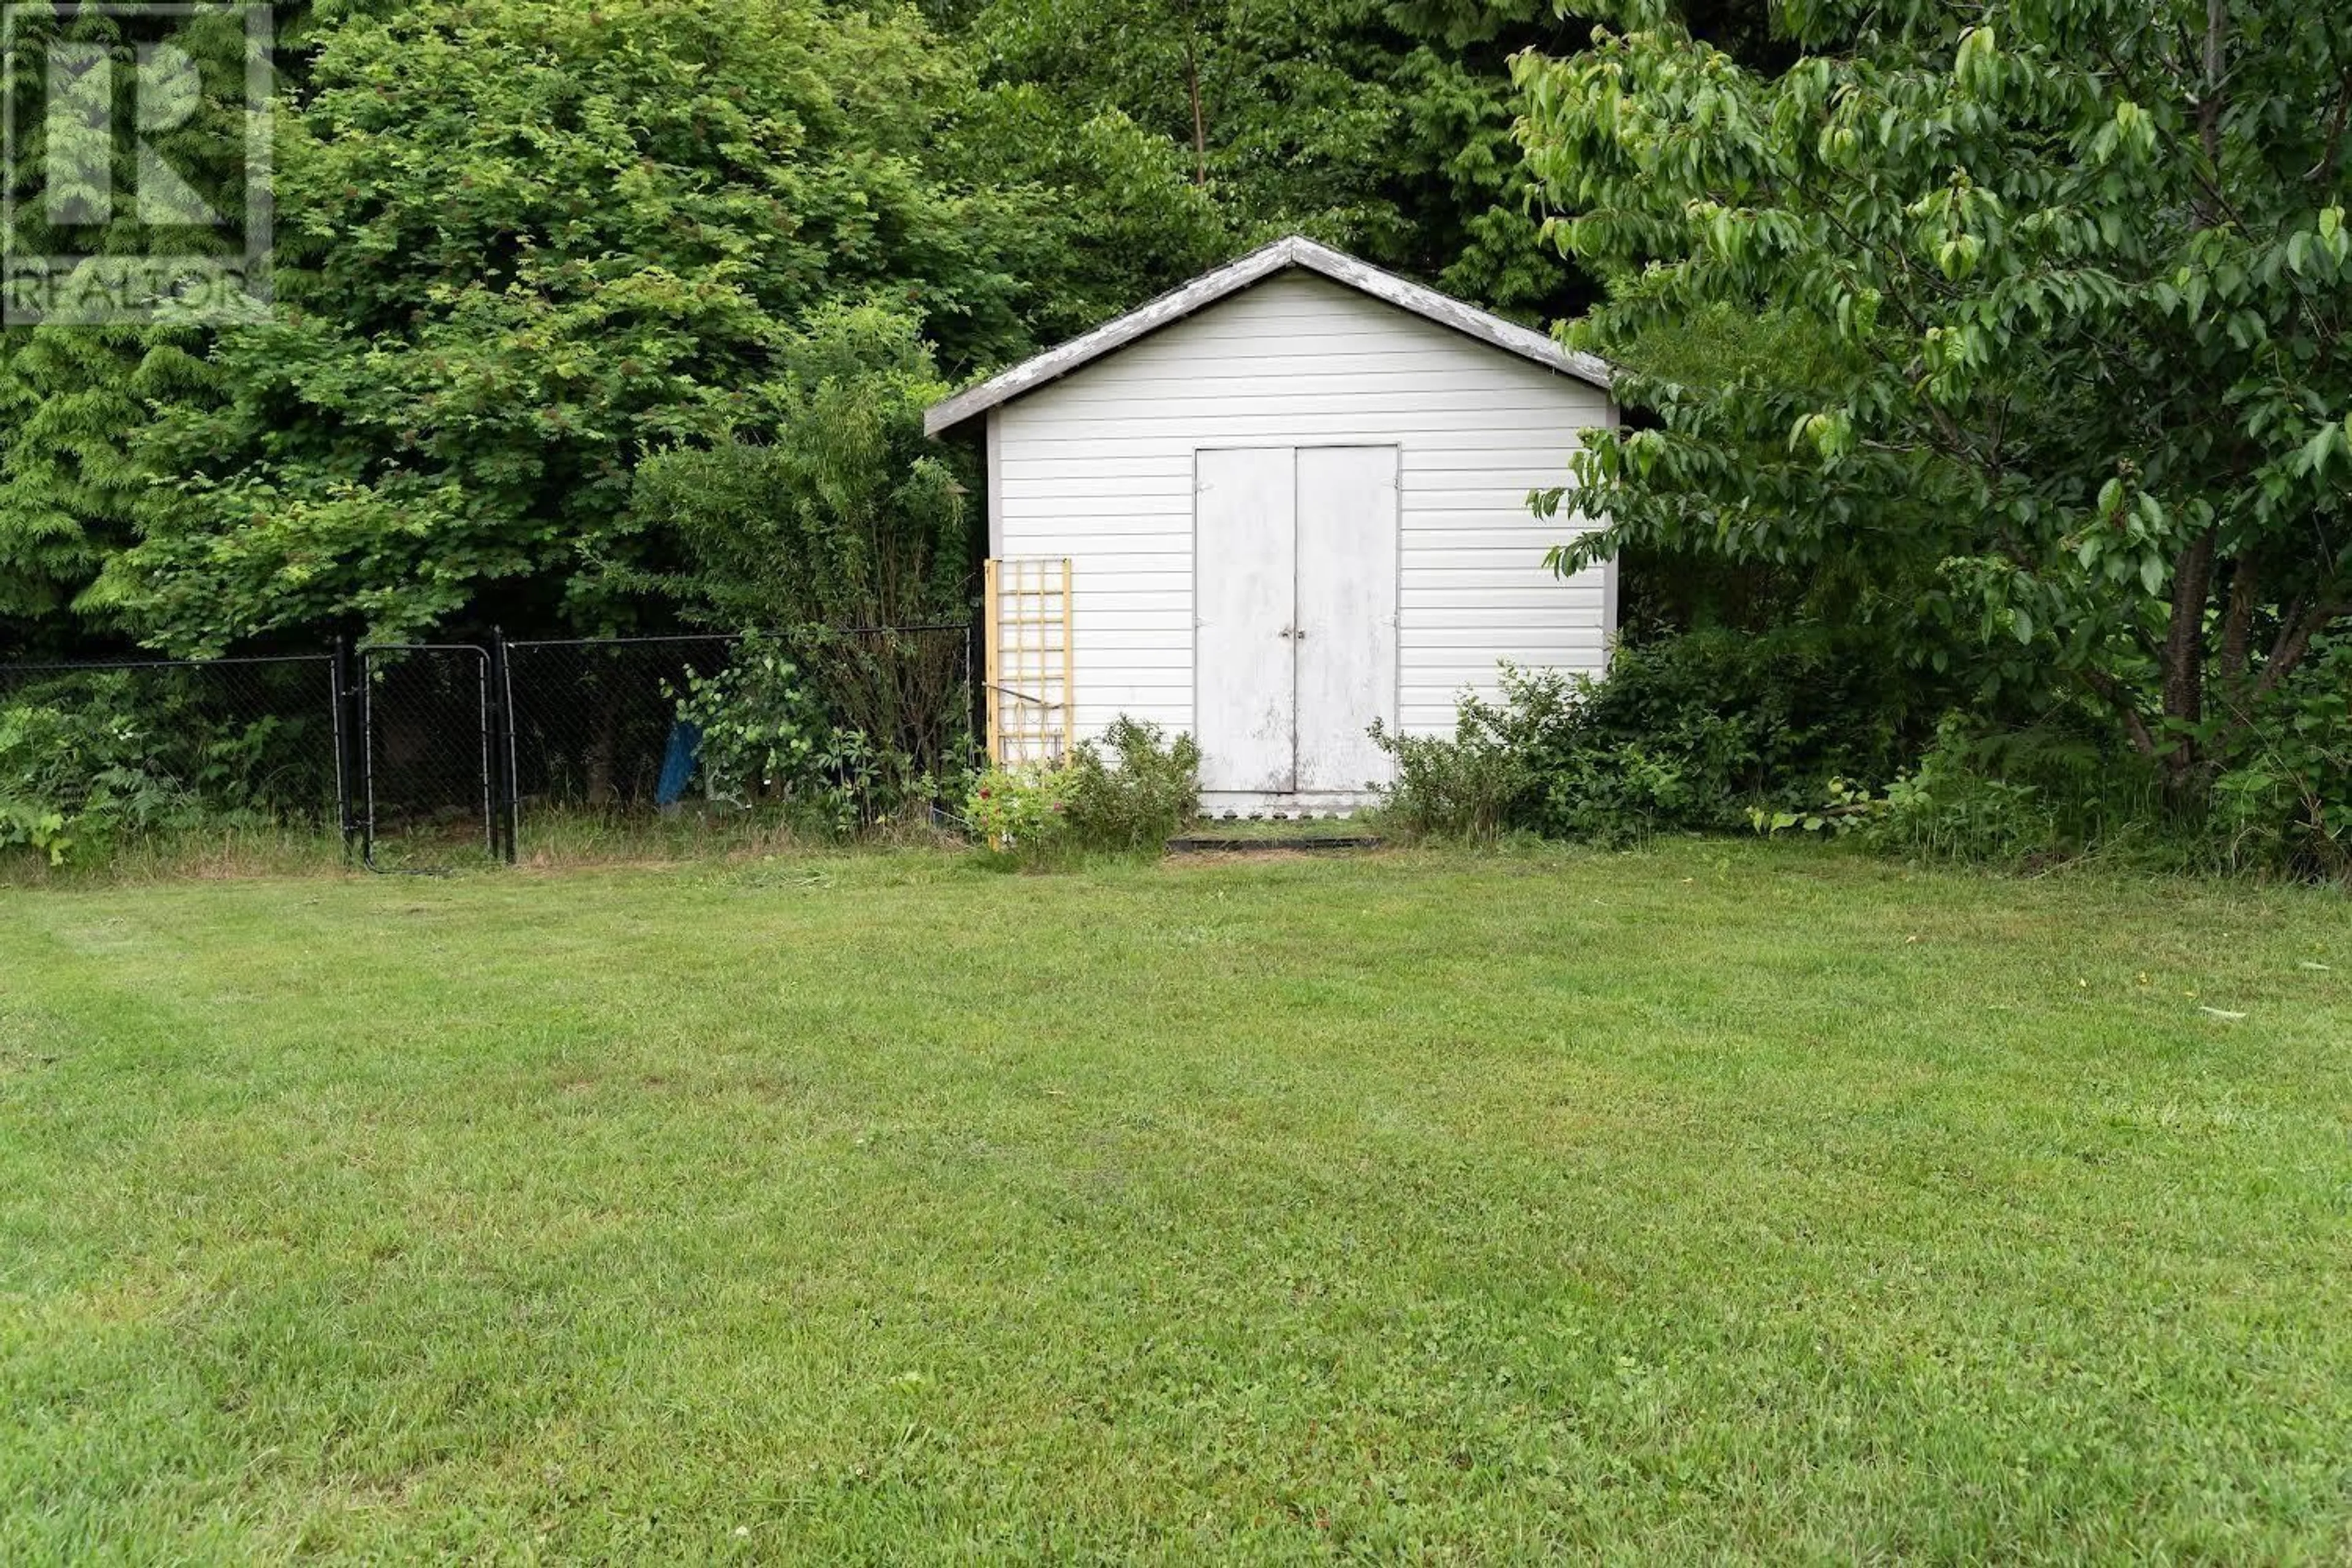 Shed for 5412 MCCONNELL CRESCENT, Terrace British Columbia V8G0C5